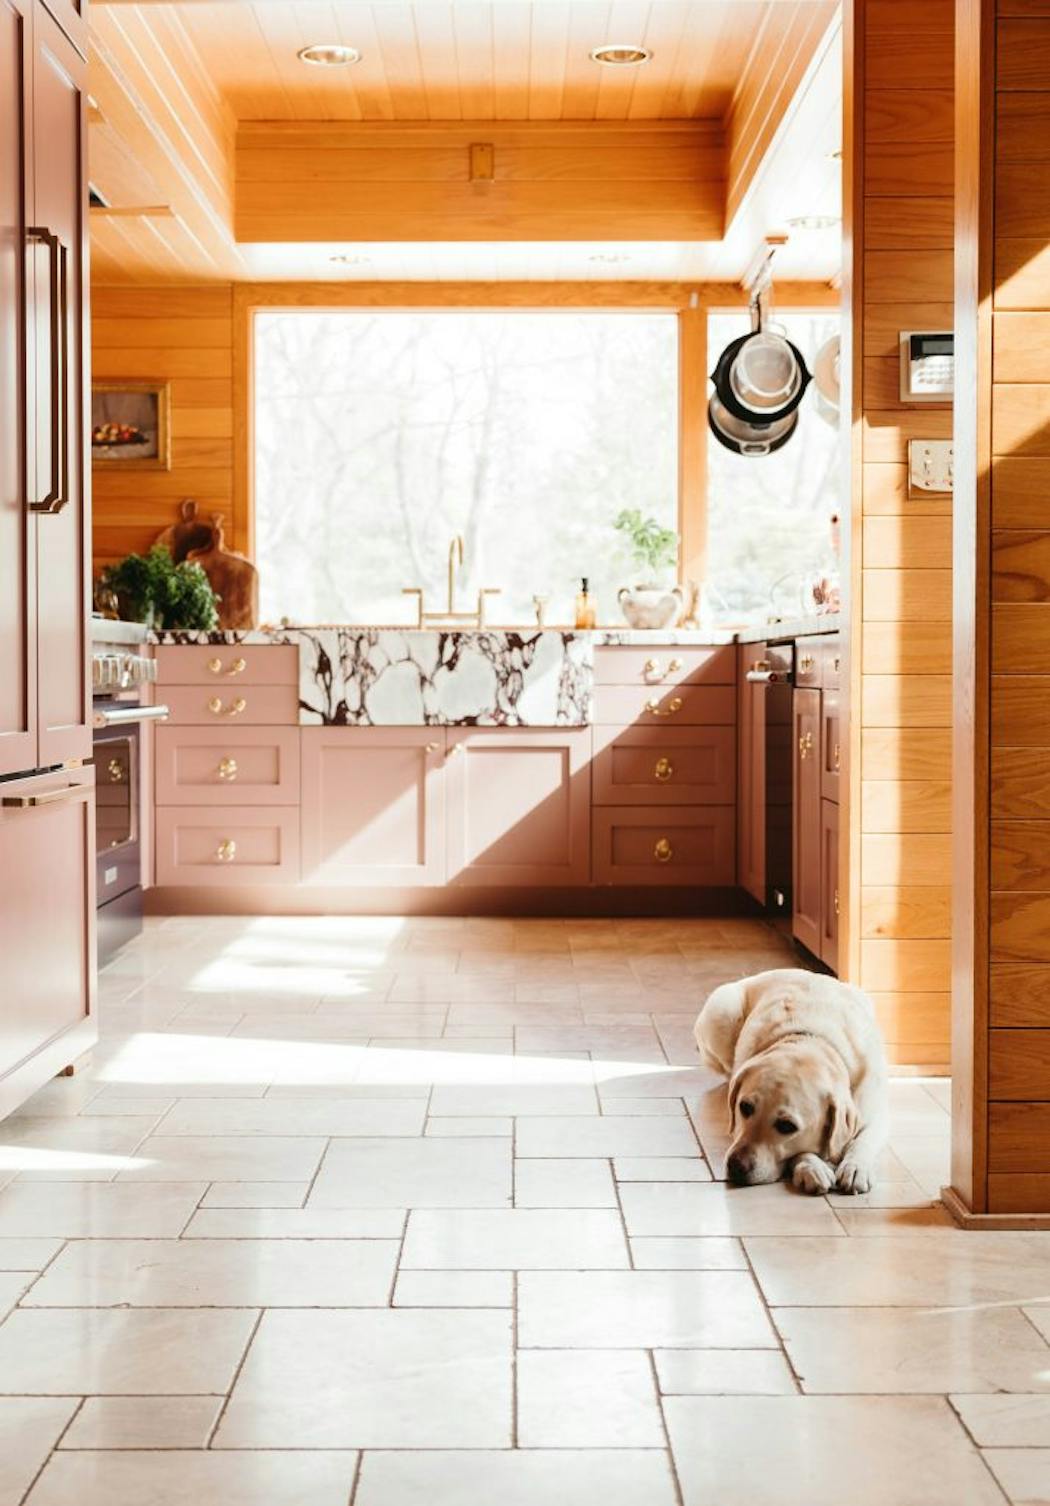 Wit & Delight blogger Kate Arends Peters' updated St. Paul kitchen juxtaposes existing red oak paneling with pink cabinetry, a blue range and Calacatta Viola marble countertops.